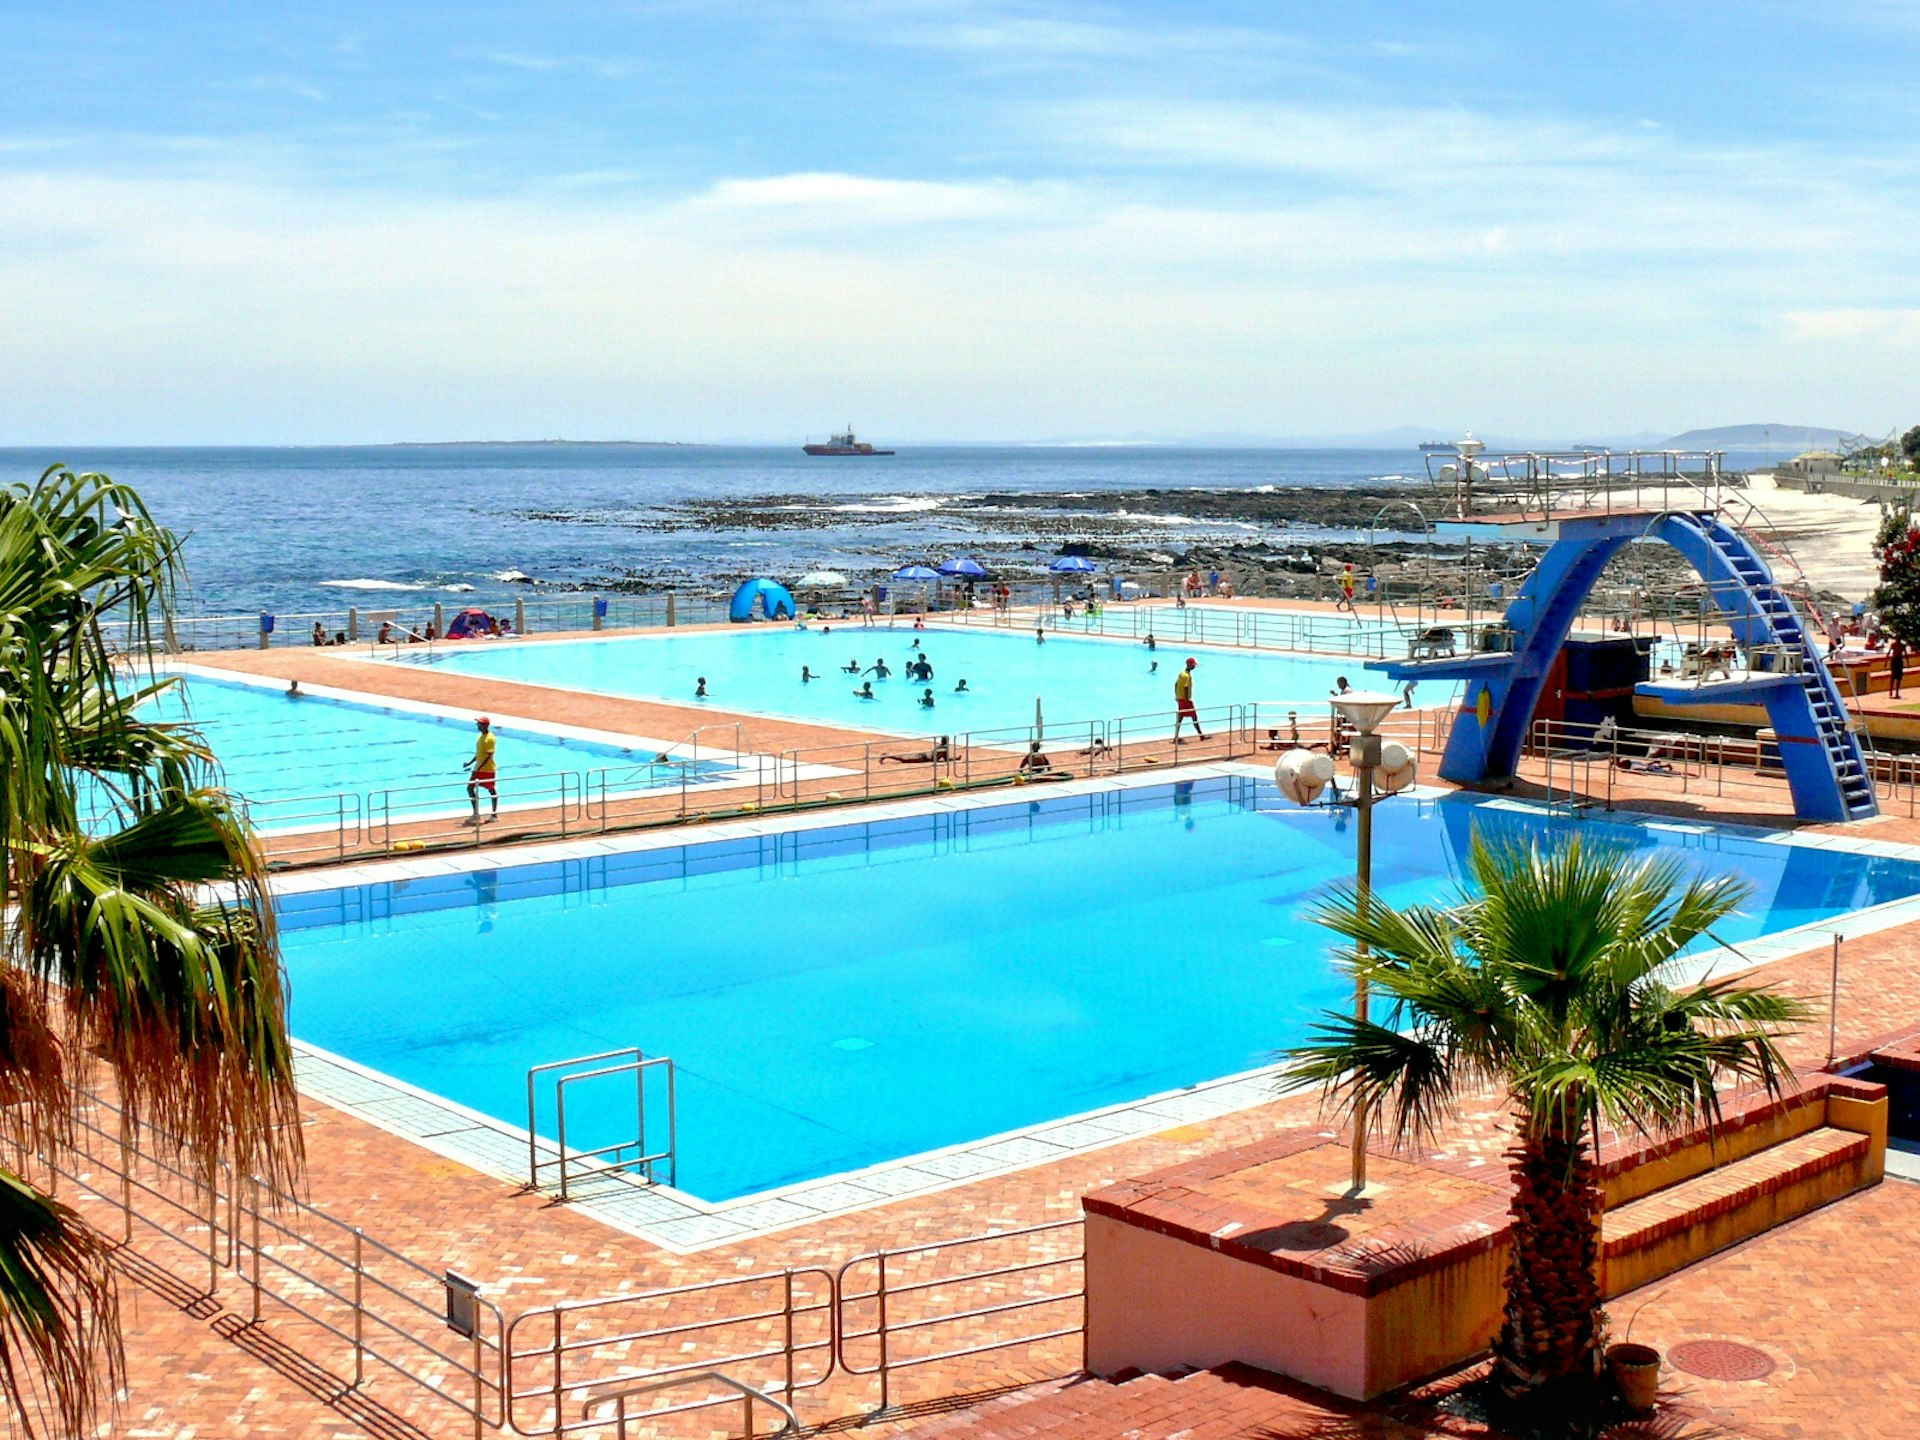 A view over the ocean pools at Cape Town's Sea Point Pavilion